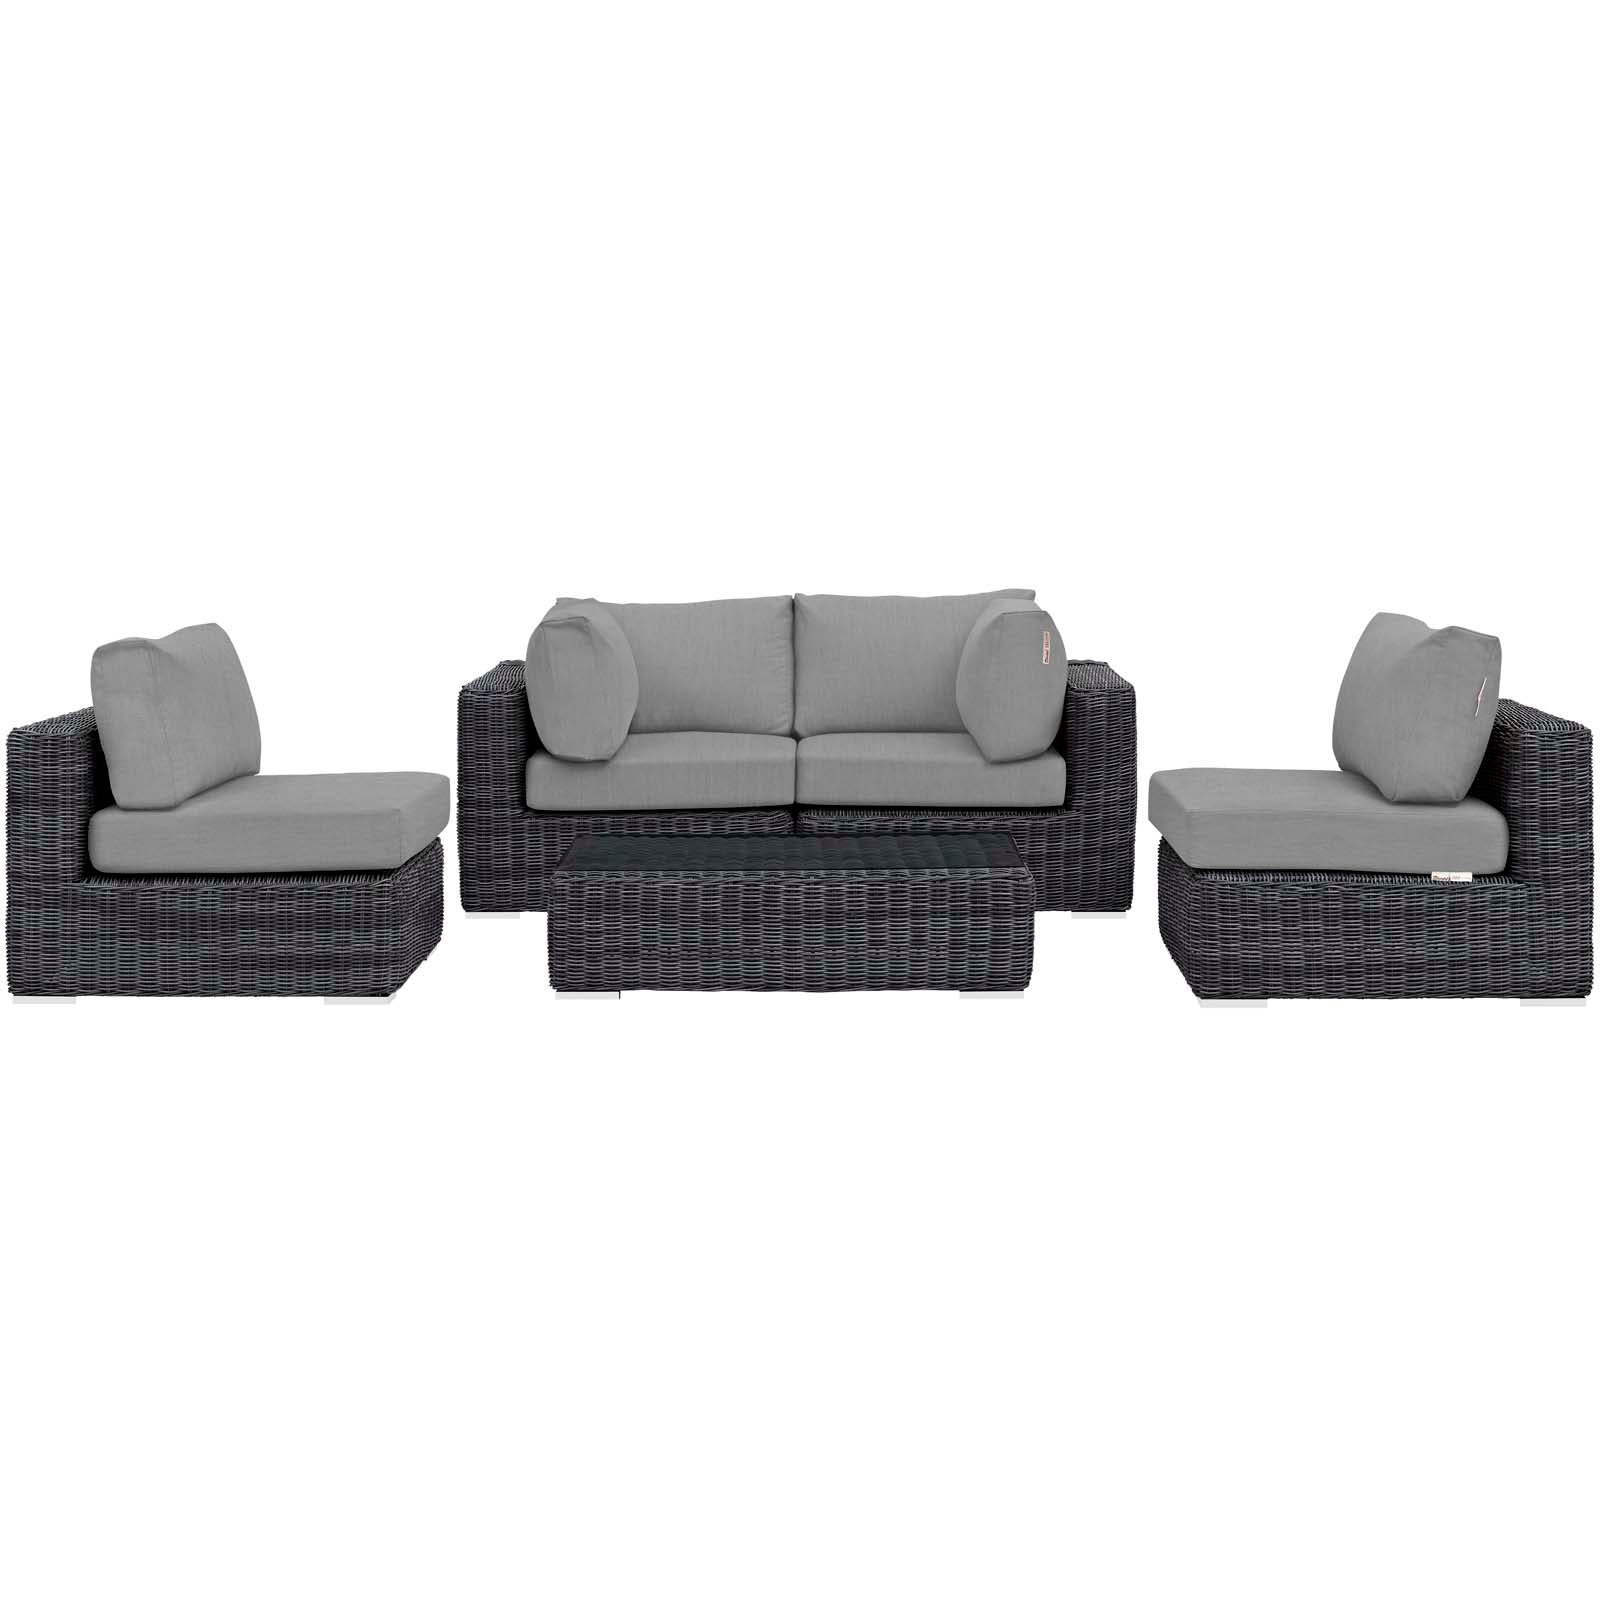 Modway Outdoor Conversation Sets - Summon 5 Piece Outdoor Patio Sectional Set Canvas Gray